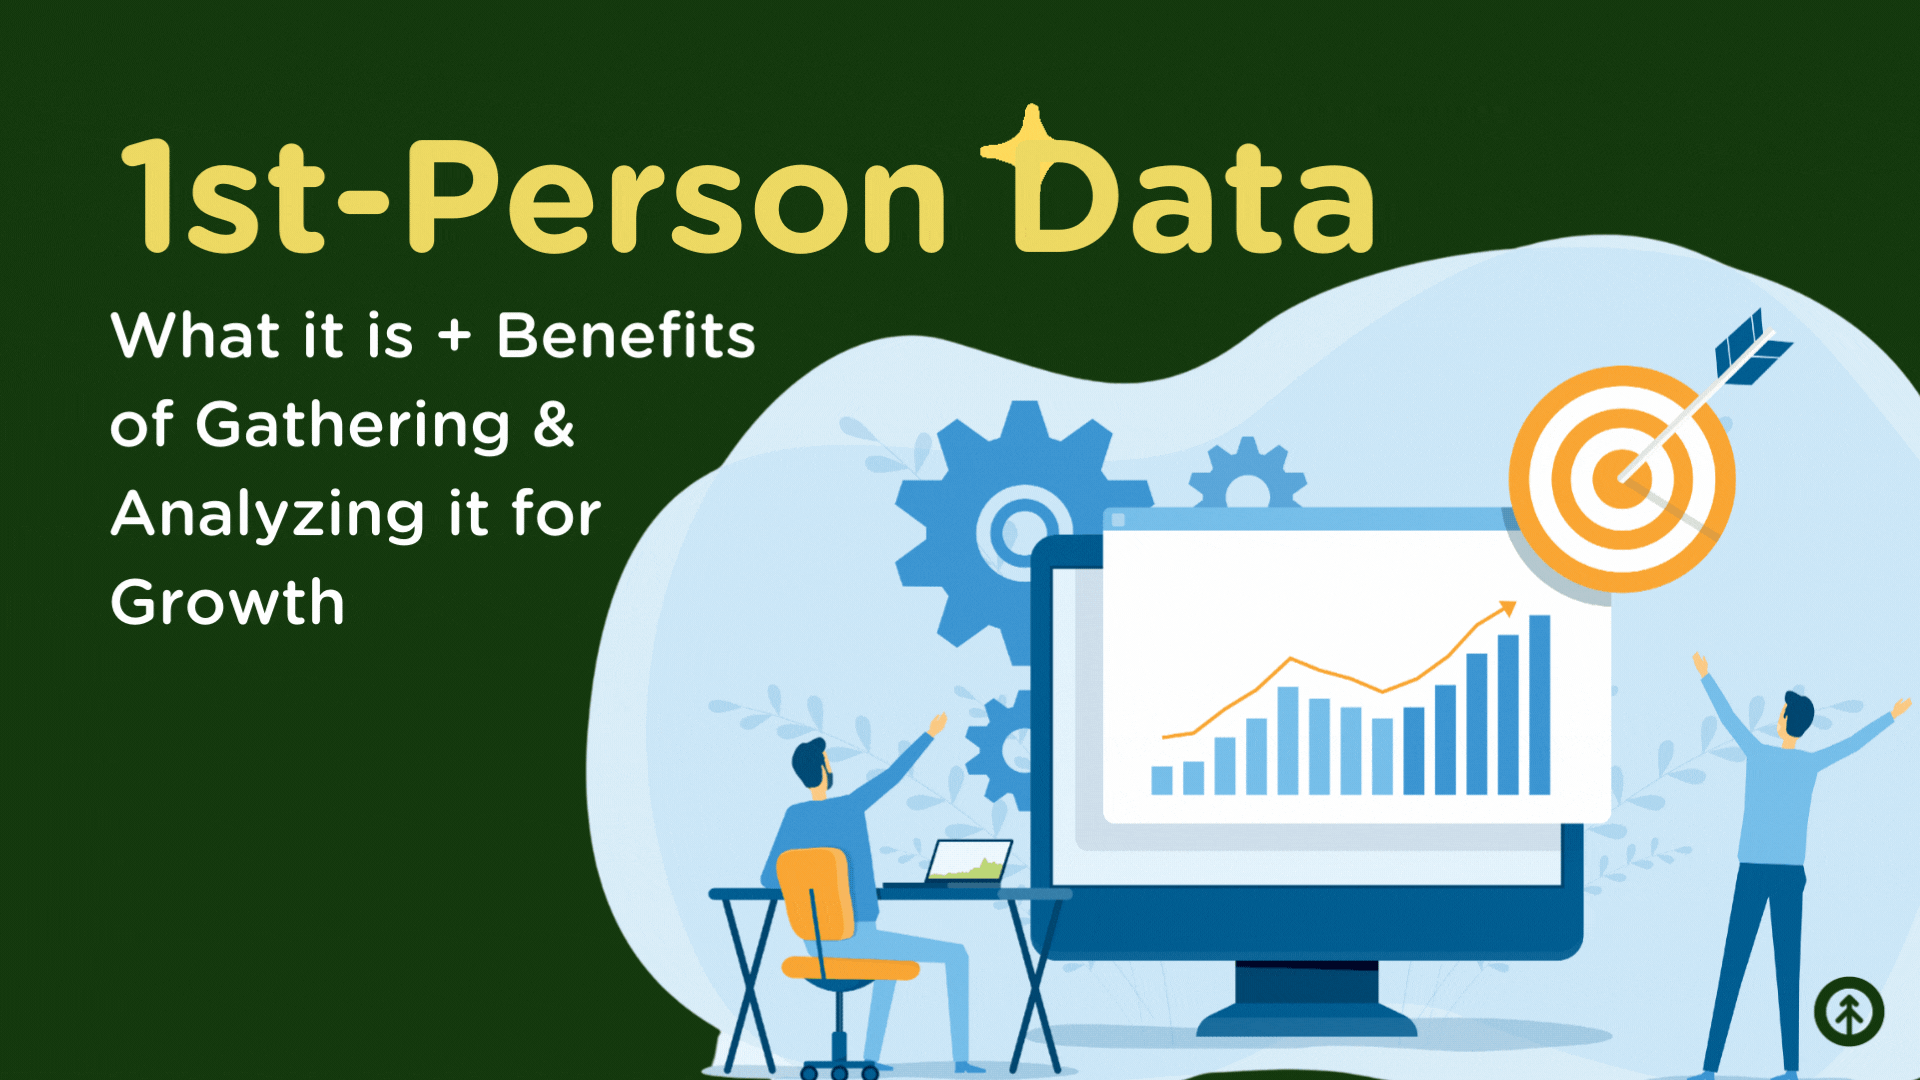 Top 3 Benefits of Gathering + Analyzing 1st-Person Data for Growth-featured